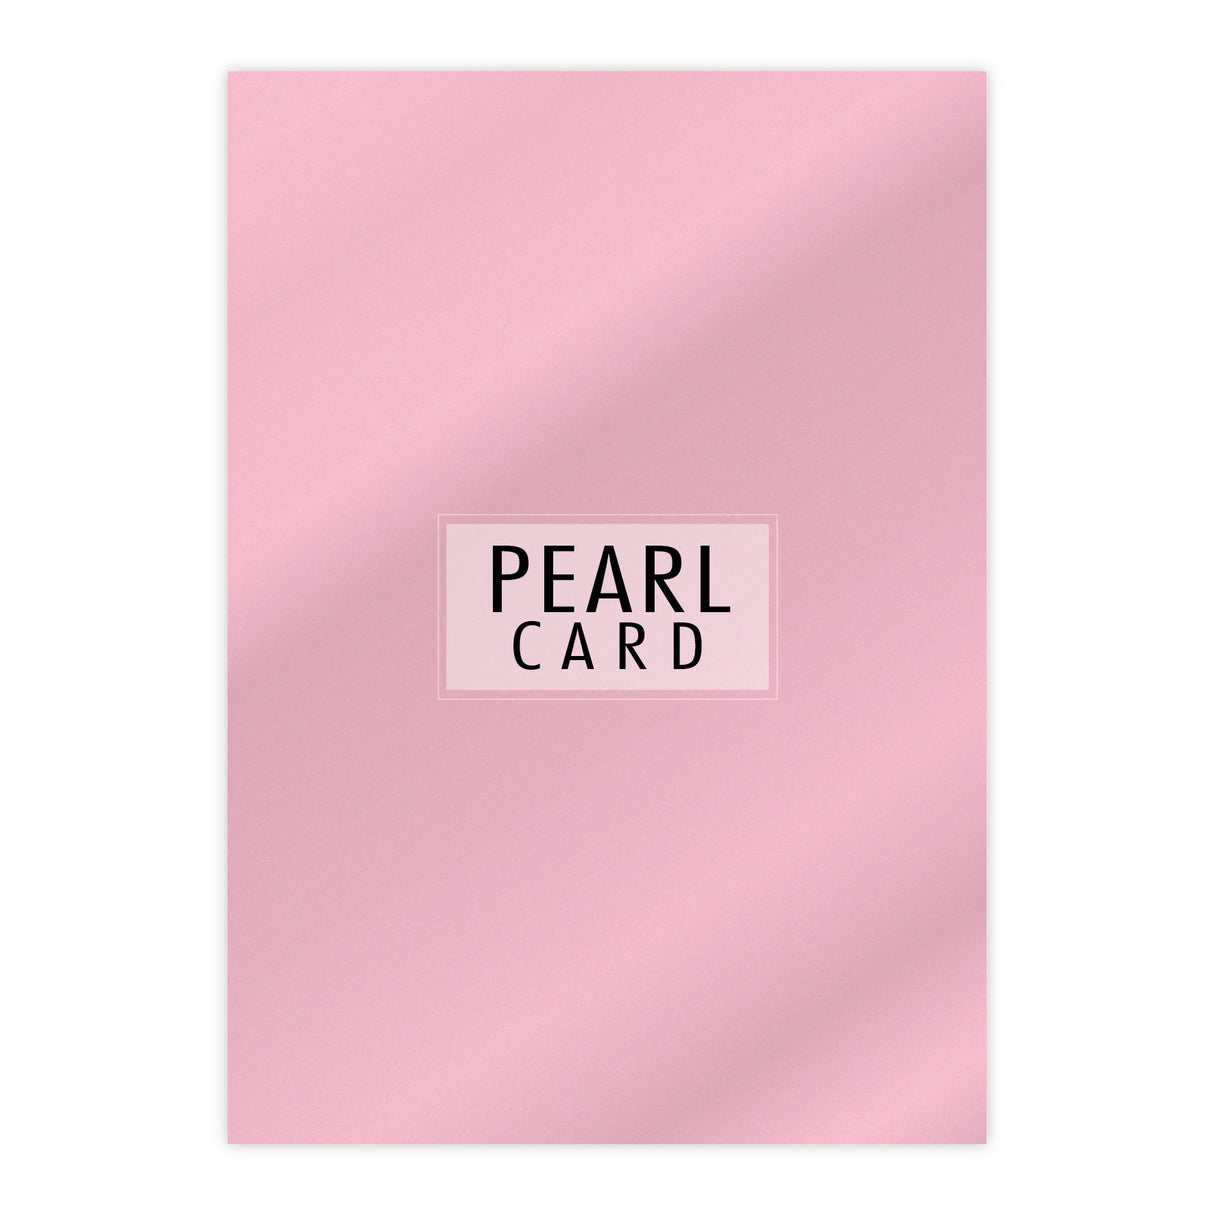 Chloes A4 Luxury Pearl Card 10 Sheets Rose Quartz